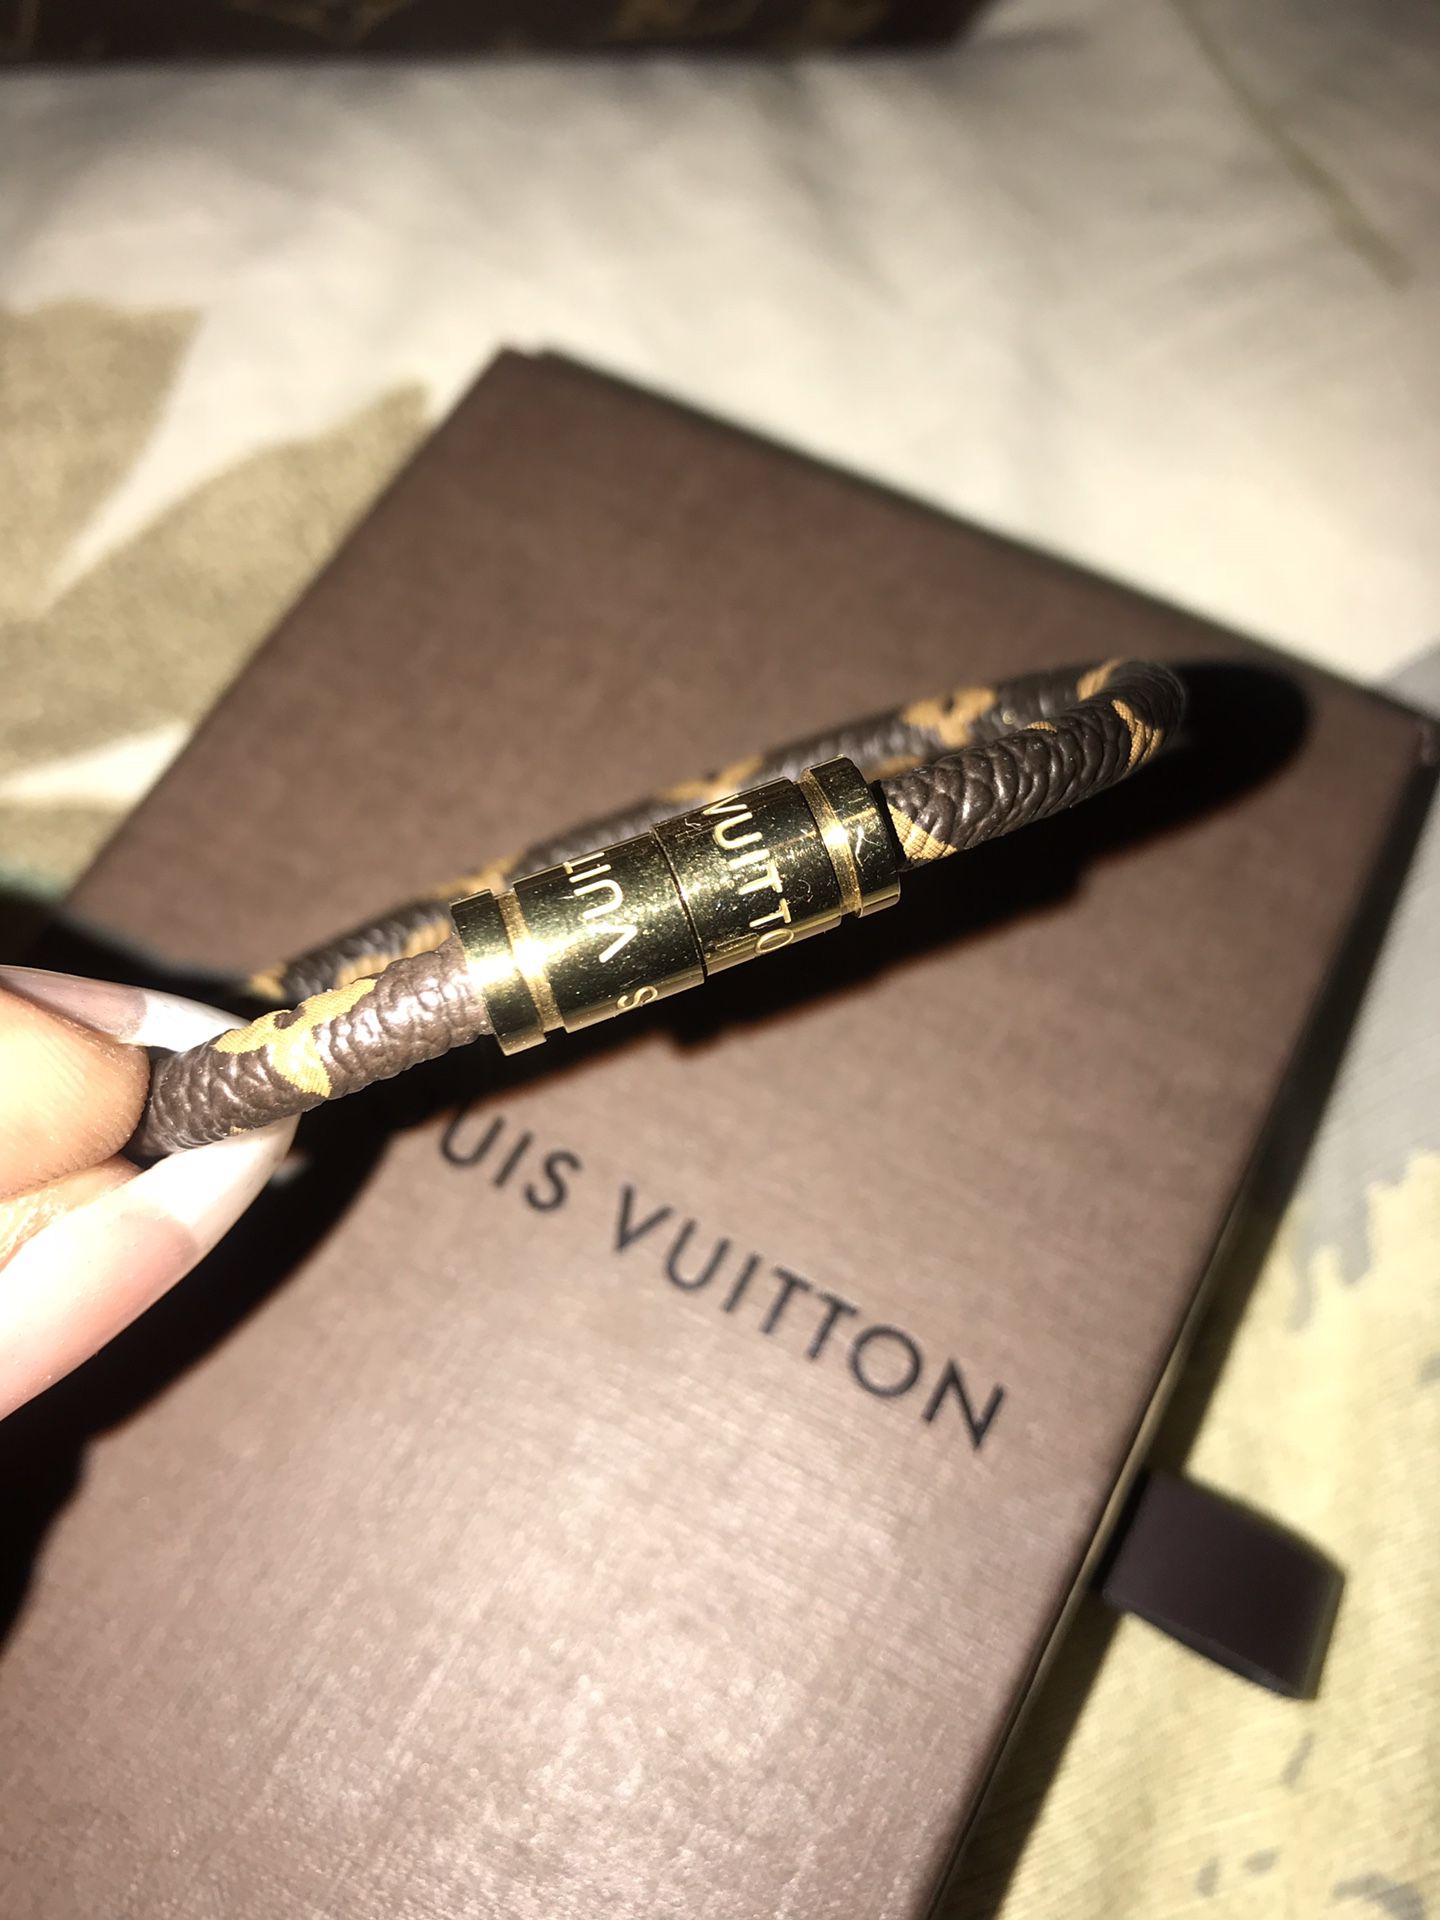 Louis Vuitton Confidential Bracelet for Sale in Bellmore, NY - OfferUp